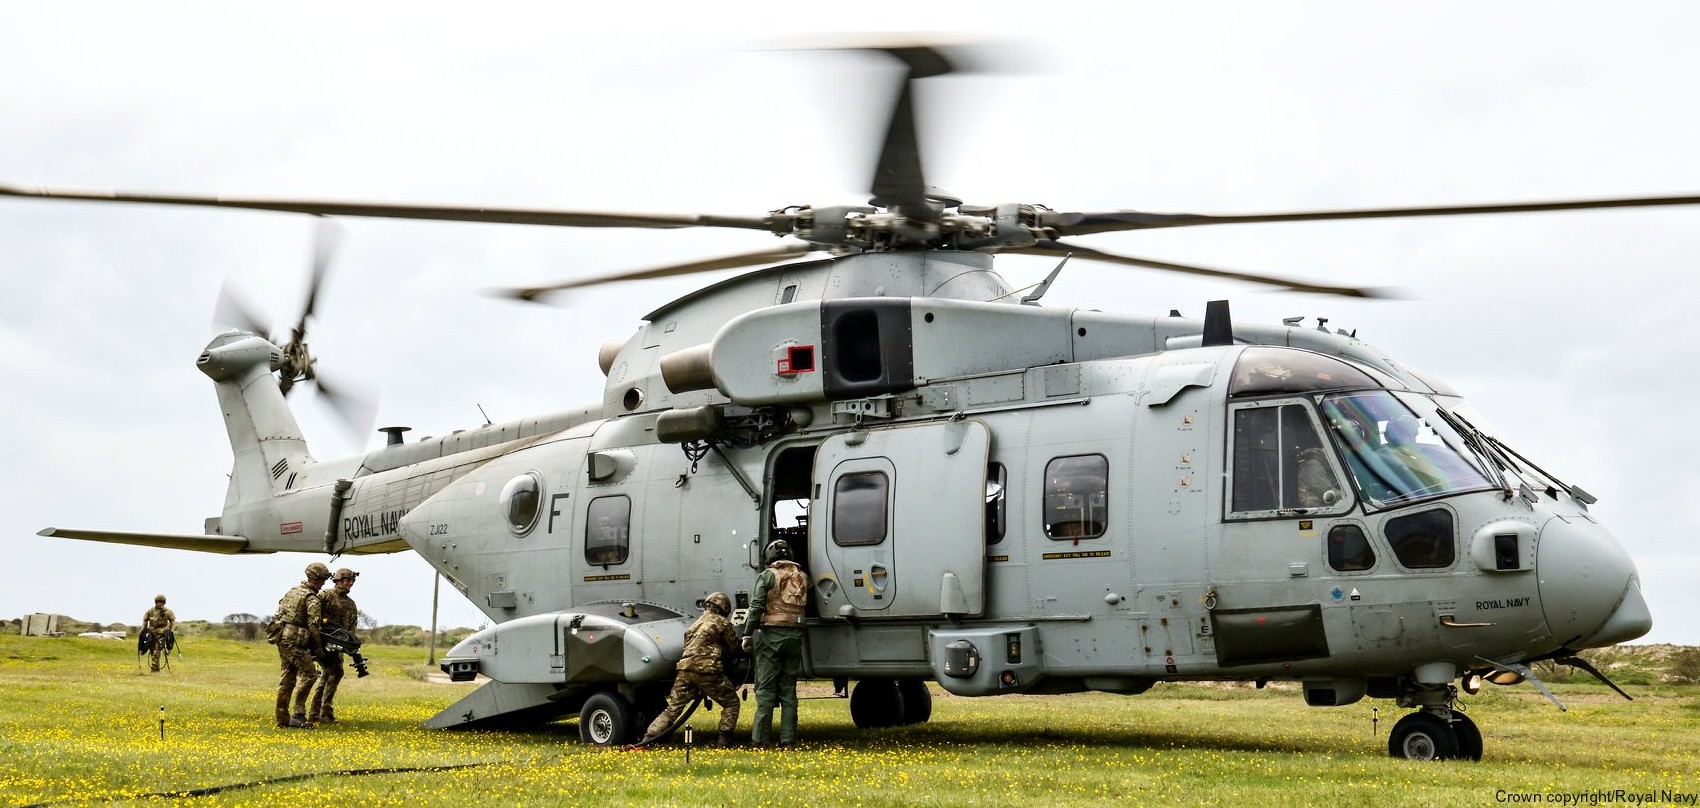 merlin hc4 mk.4 commando helicopter force chf royal navy 845 846 naval air squadron rnas yeovilton aw101 07